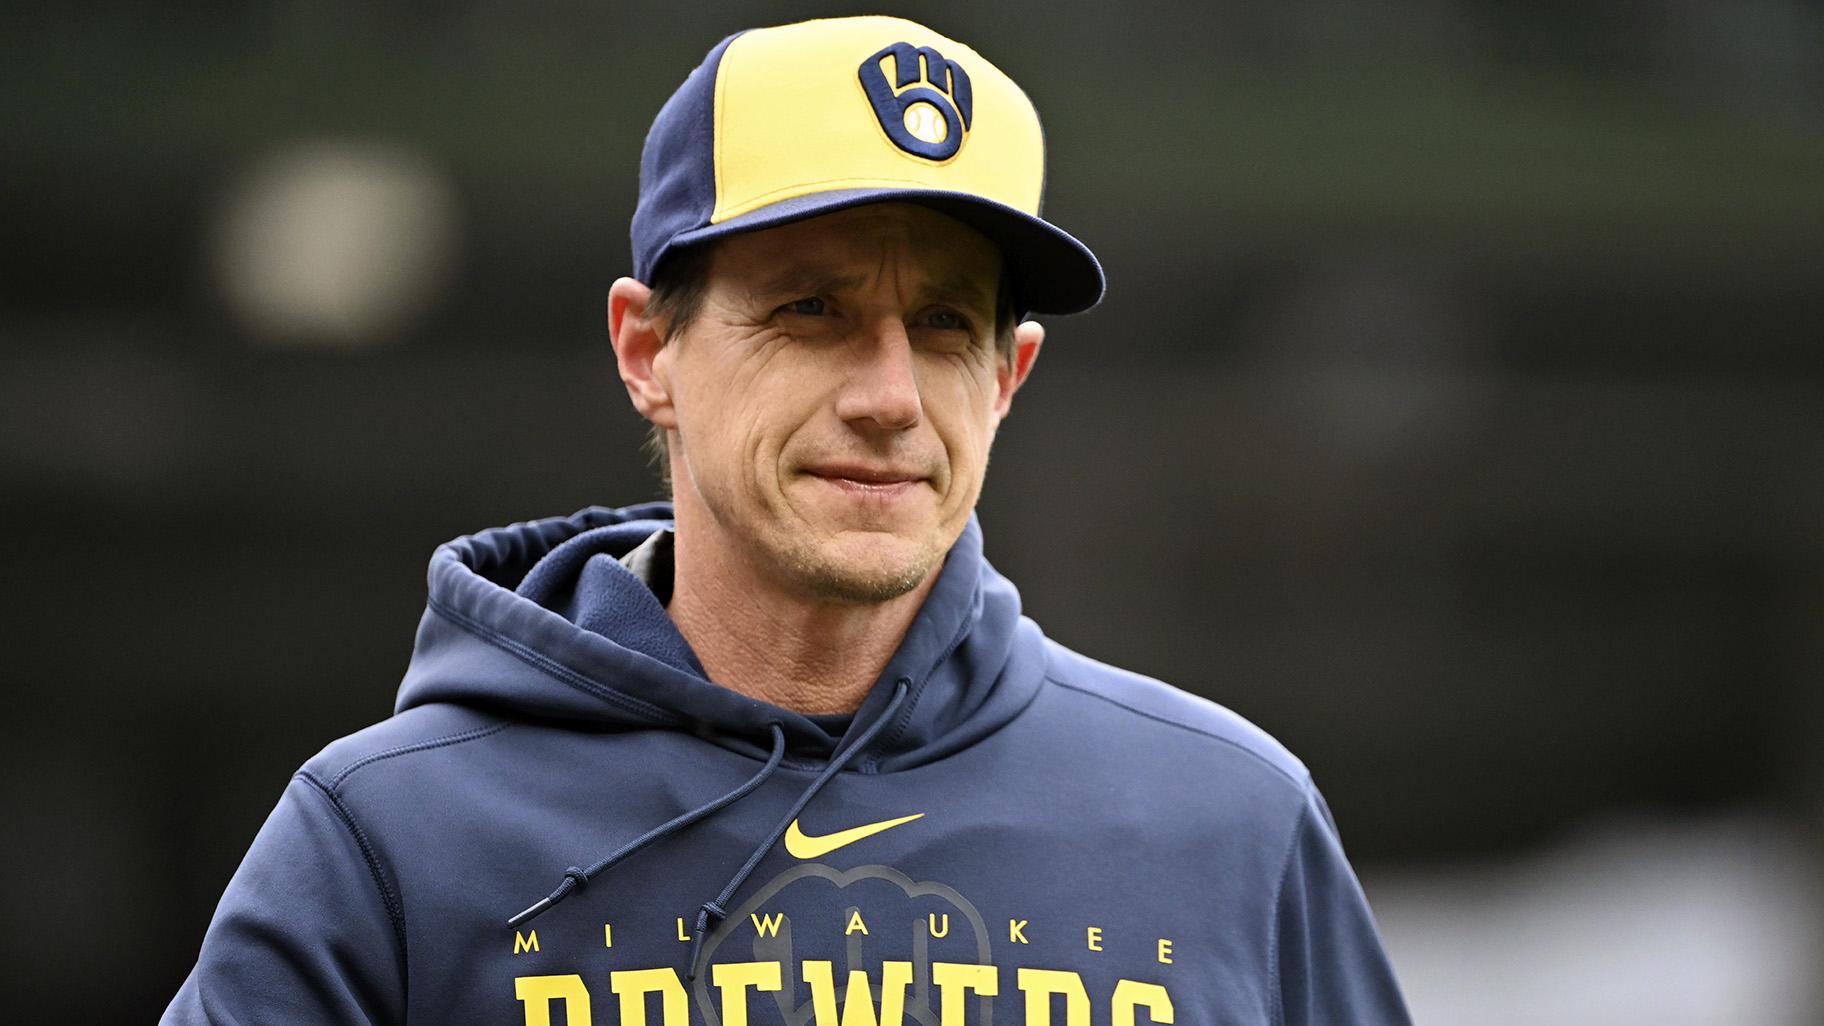 Milwaukee Brewers manager Craig Counsell looks on before a baseball game against the Chicago Cubs, Saturday, April 1, 2023, in Chicago. (AP Photo / Quinn Harris, File)